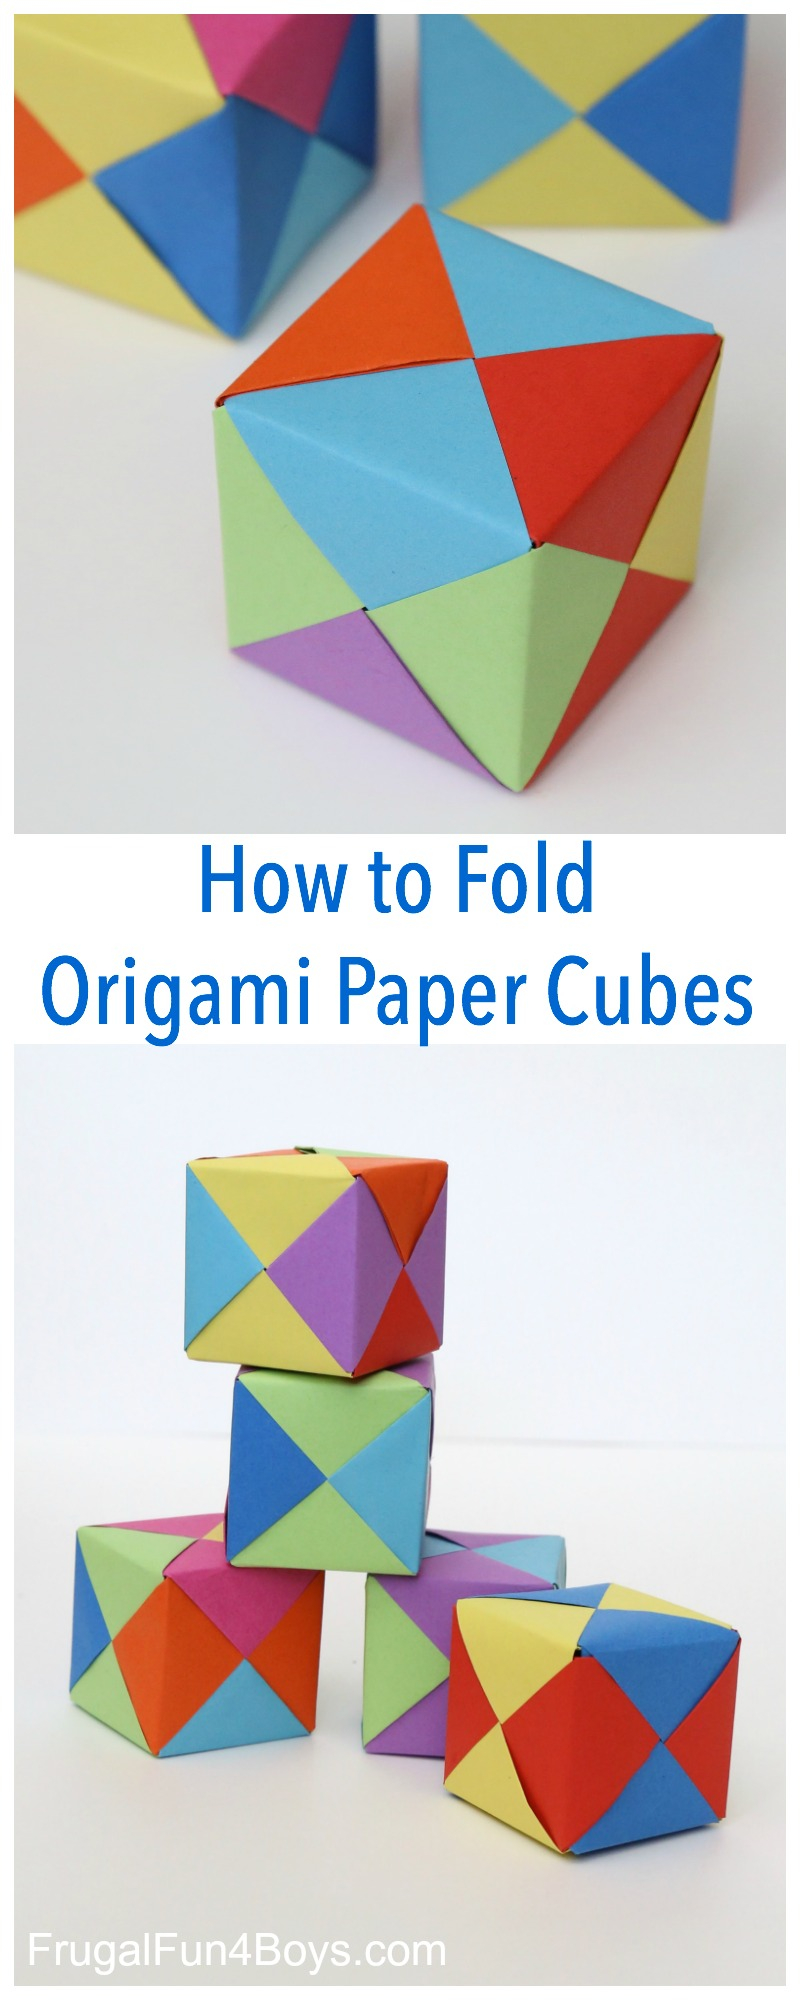 Origami Book Instructions How To Fold Origami Paper Cubes Frugal Fun For Boys And Girls